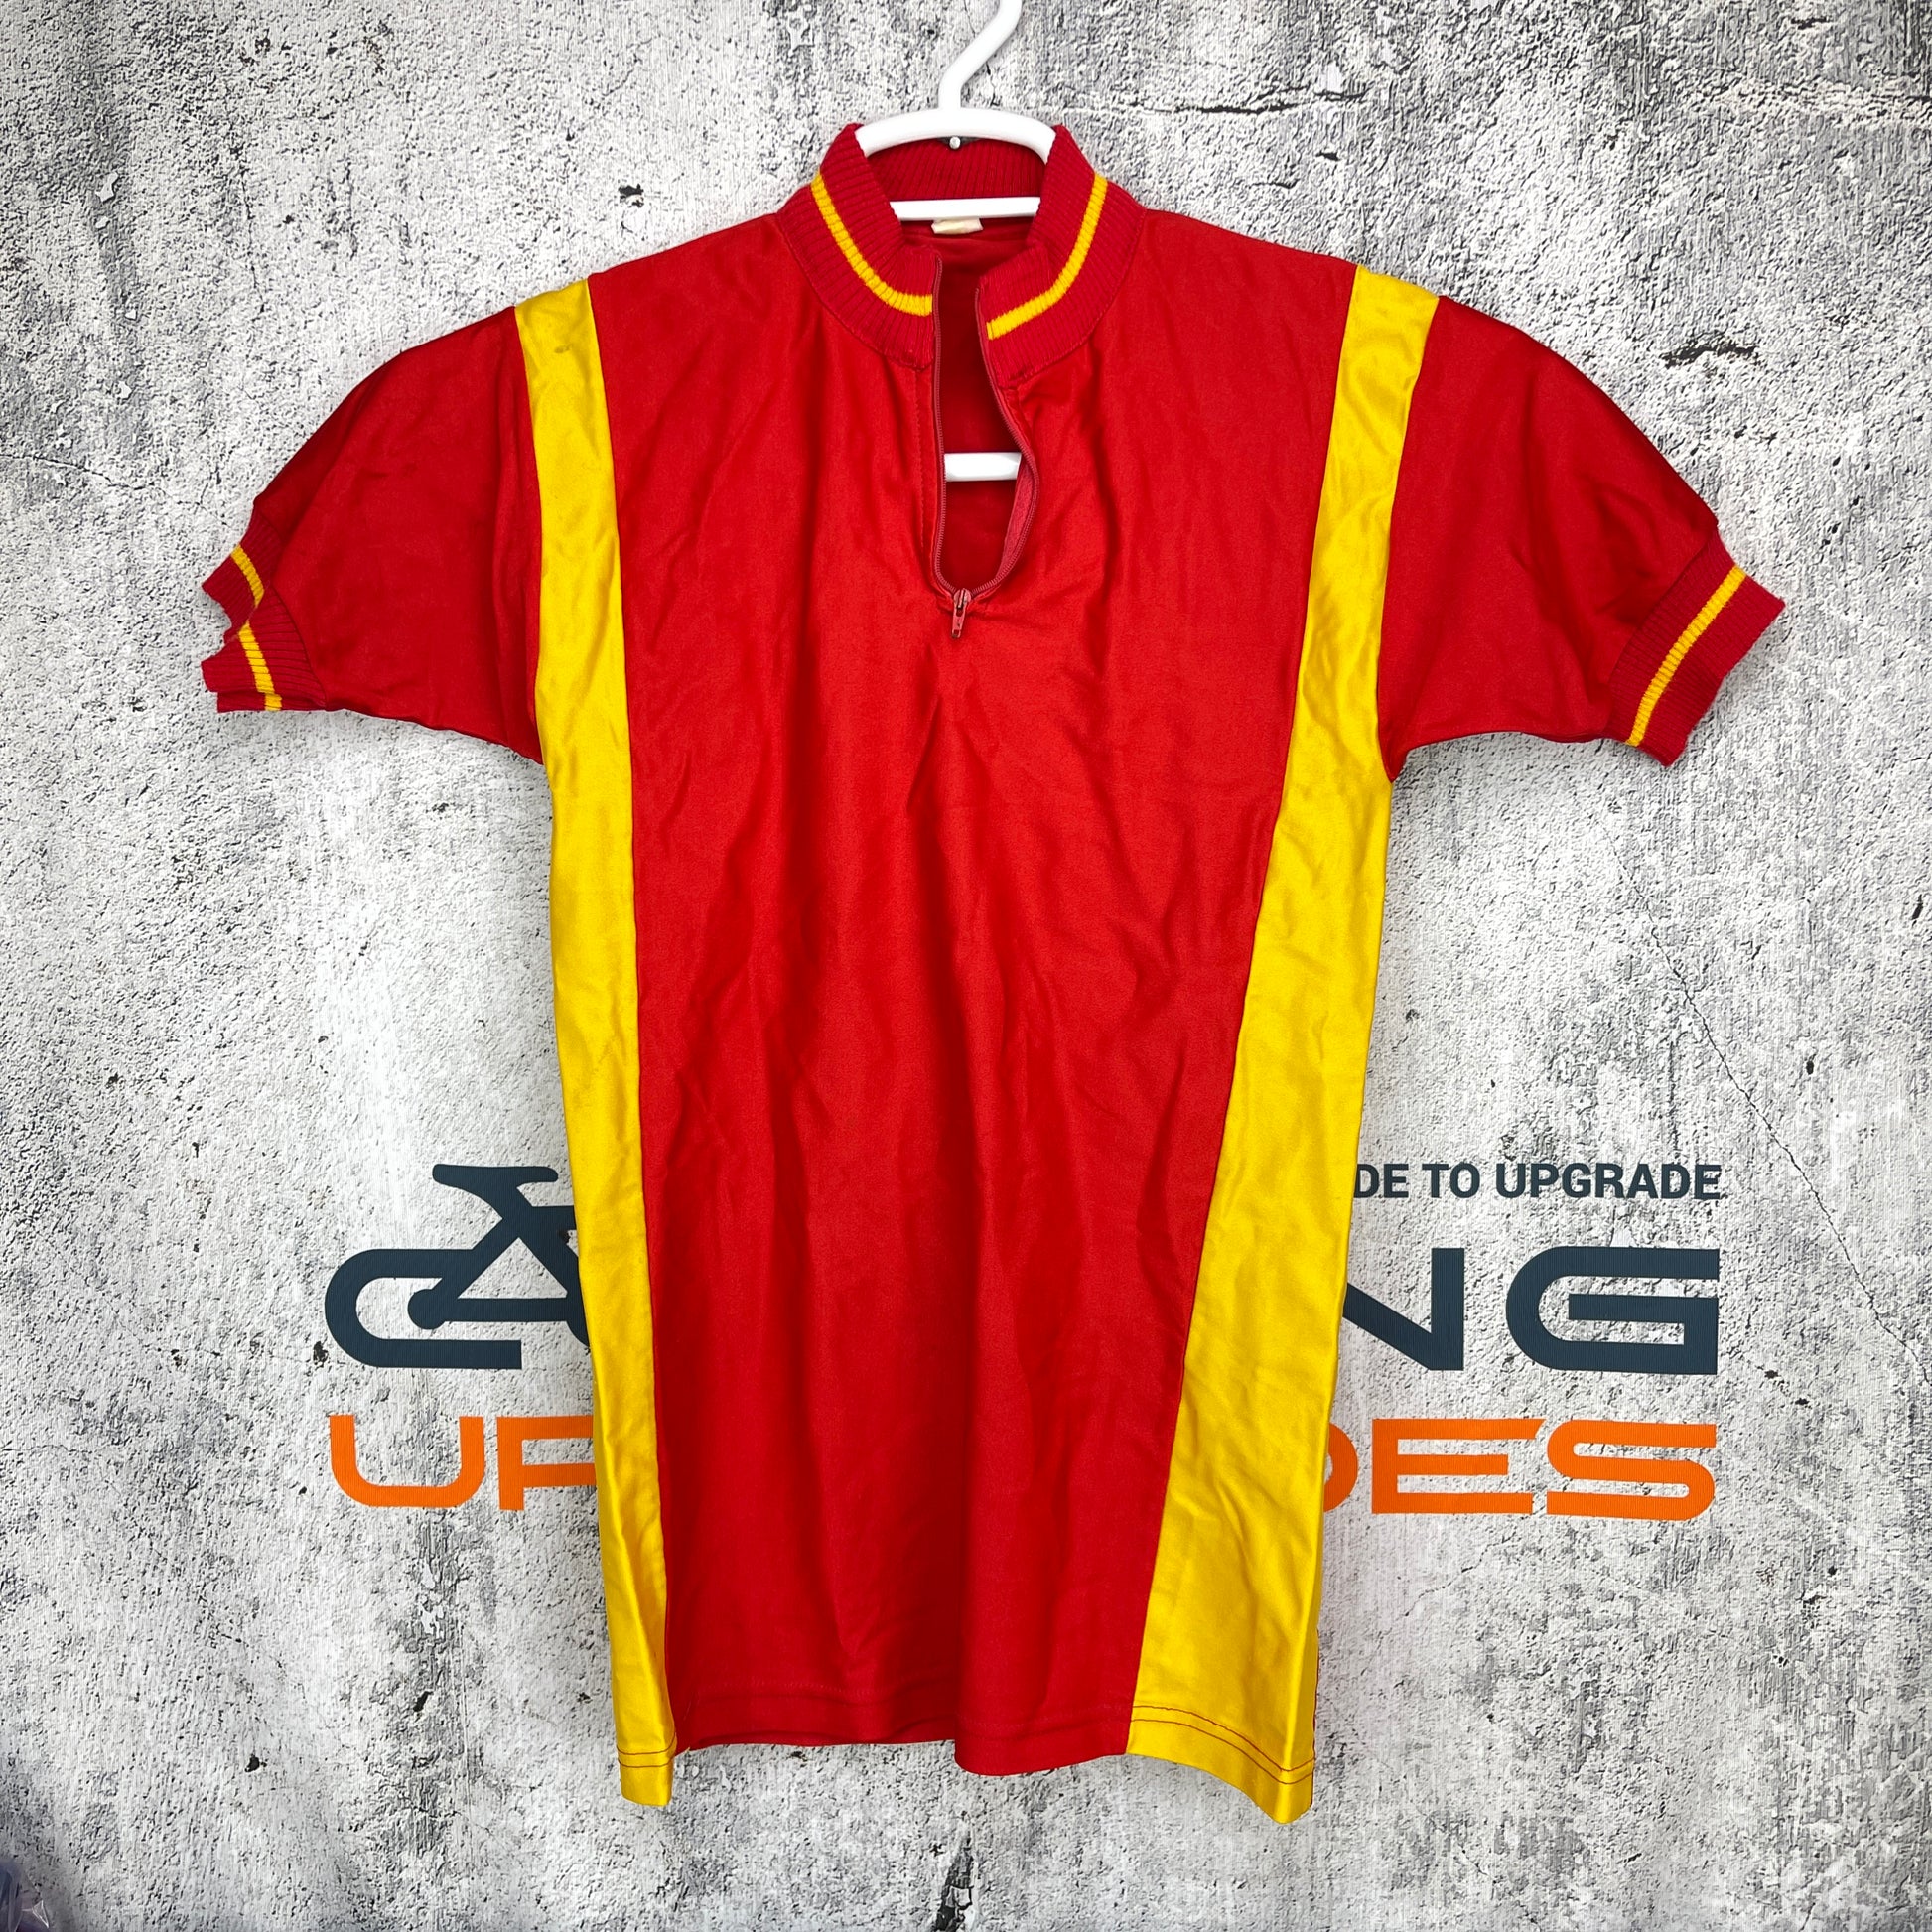 Men's Cycling Jersey Descente Vintage Bike Jersey With 